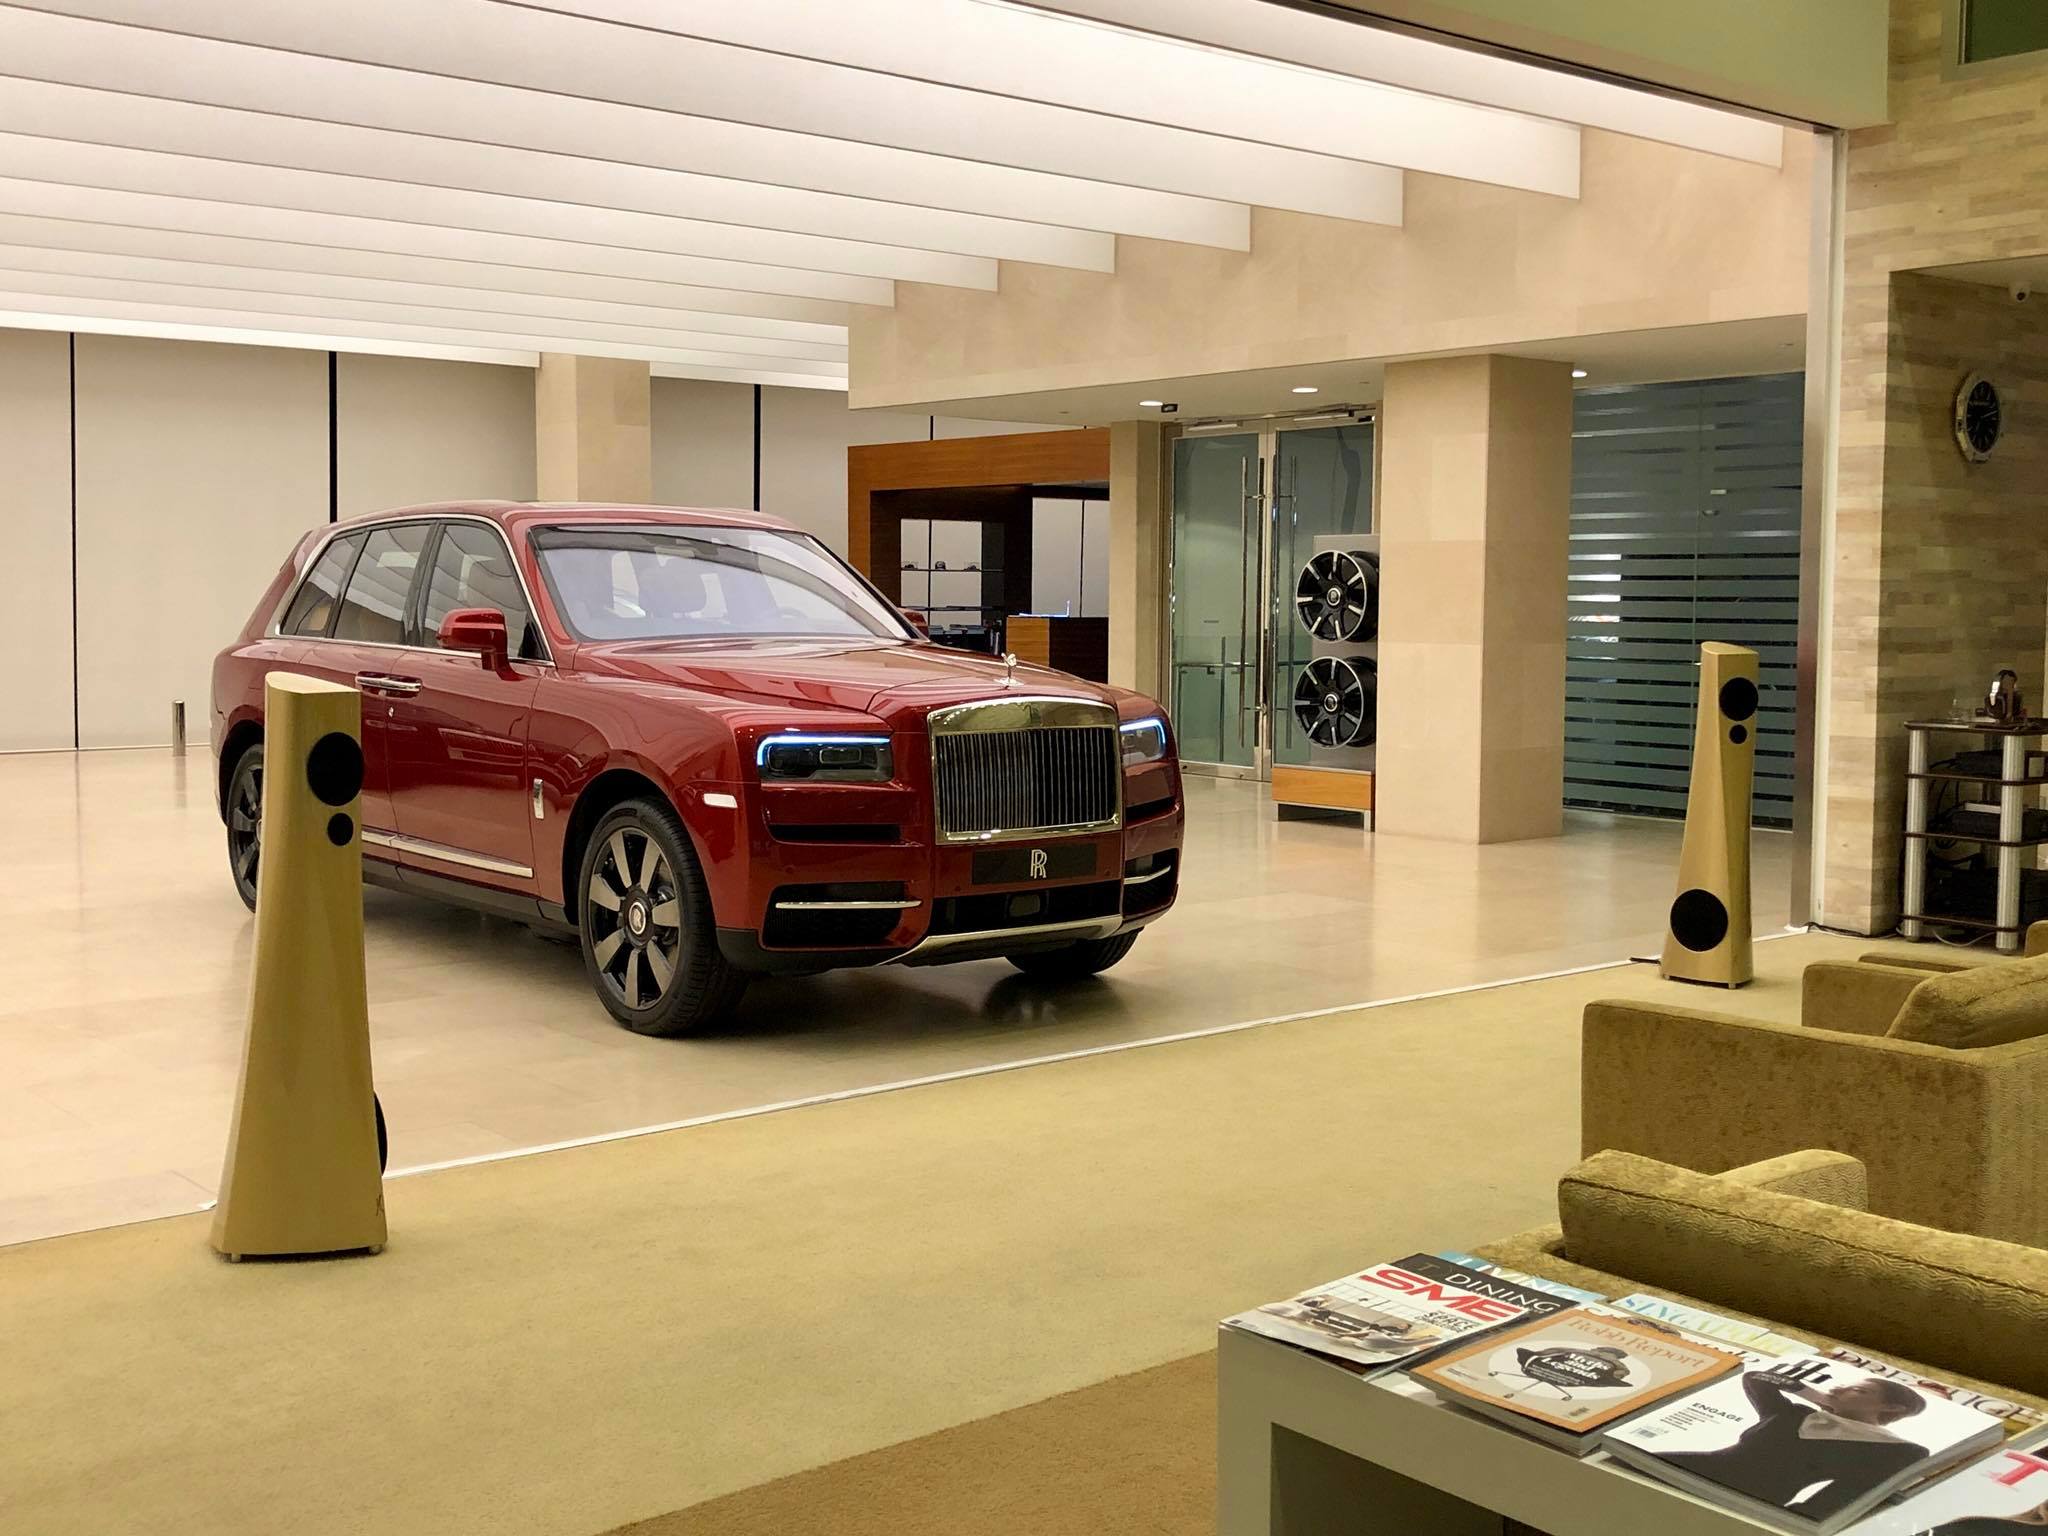 RollsRoyce Opens its Largest Dealership in the World in AbuDhabi   Carscoops